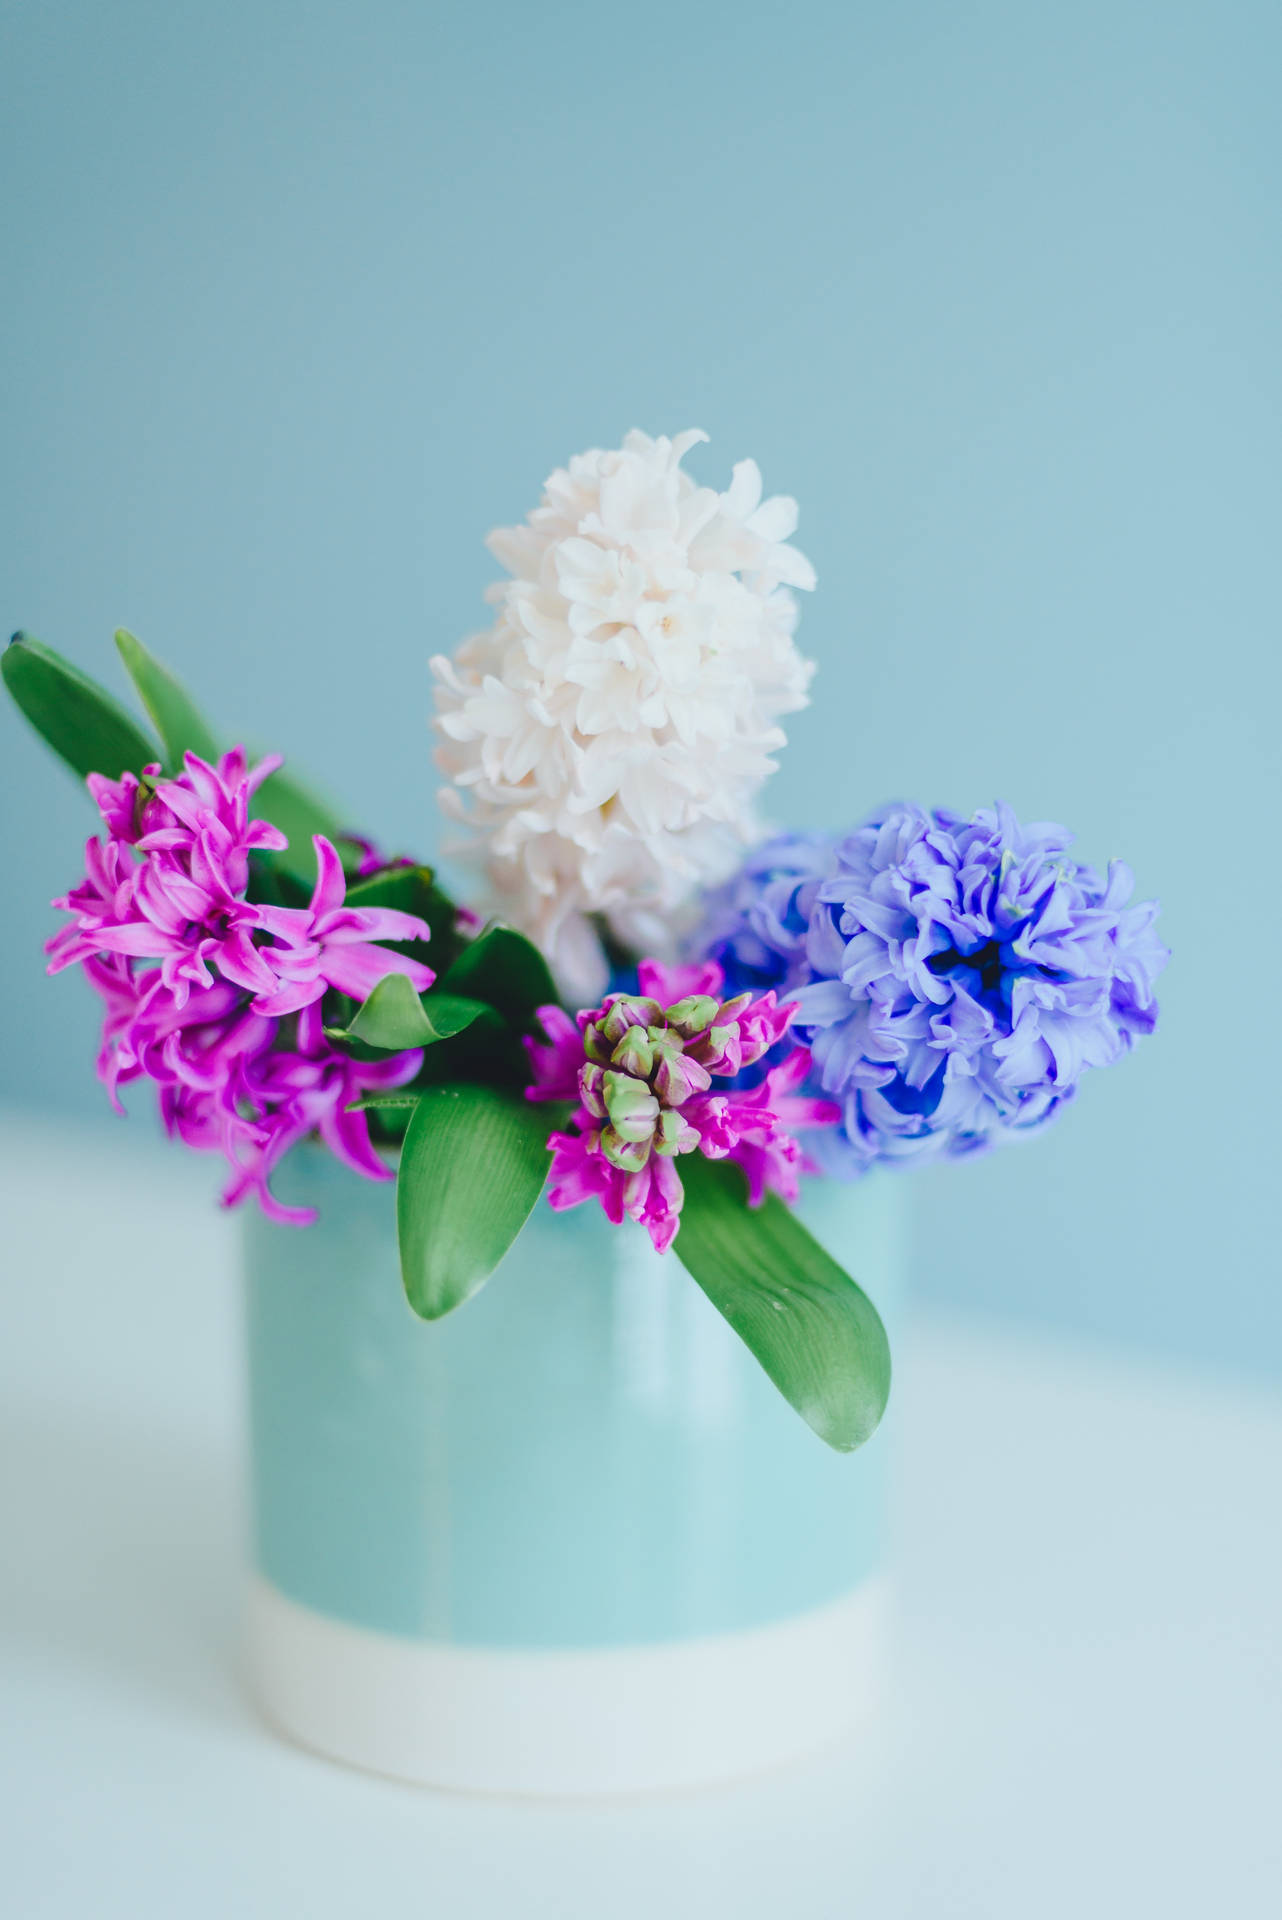 Hyacinth Flowers In Blue Can Background